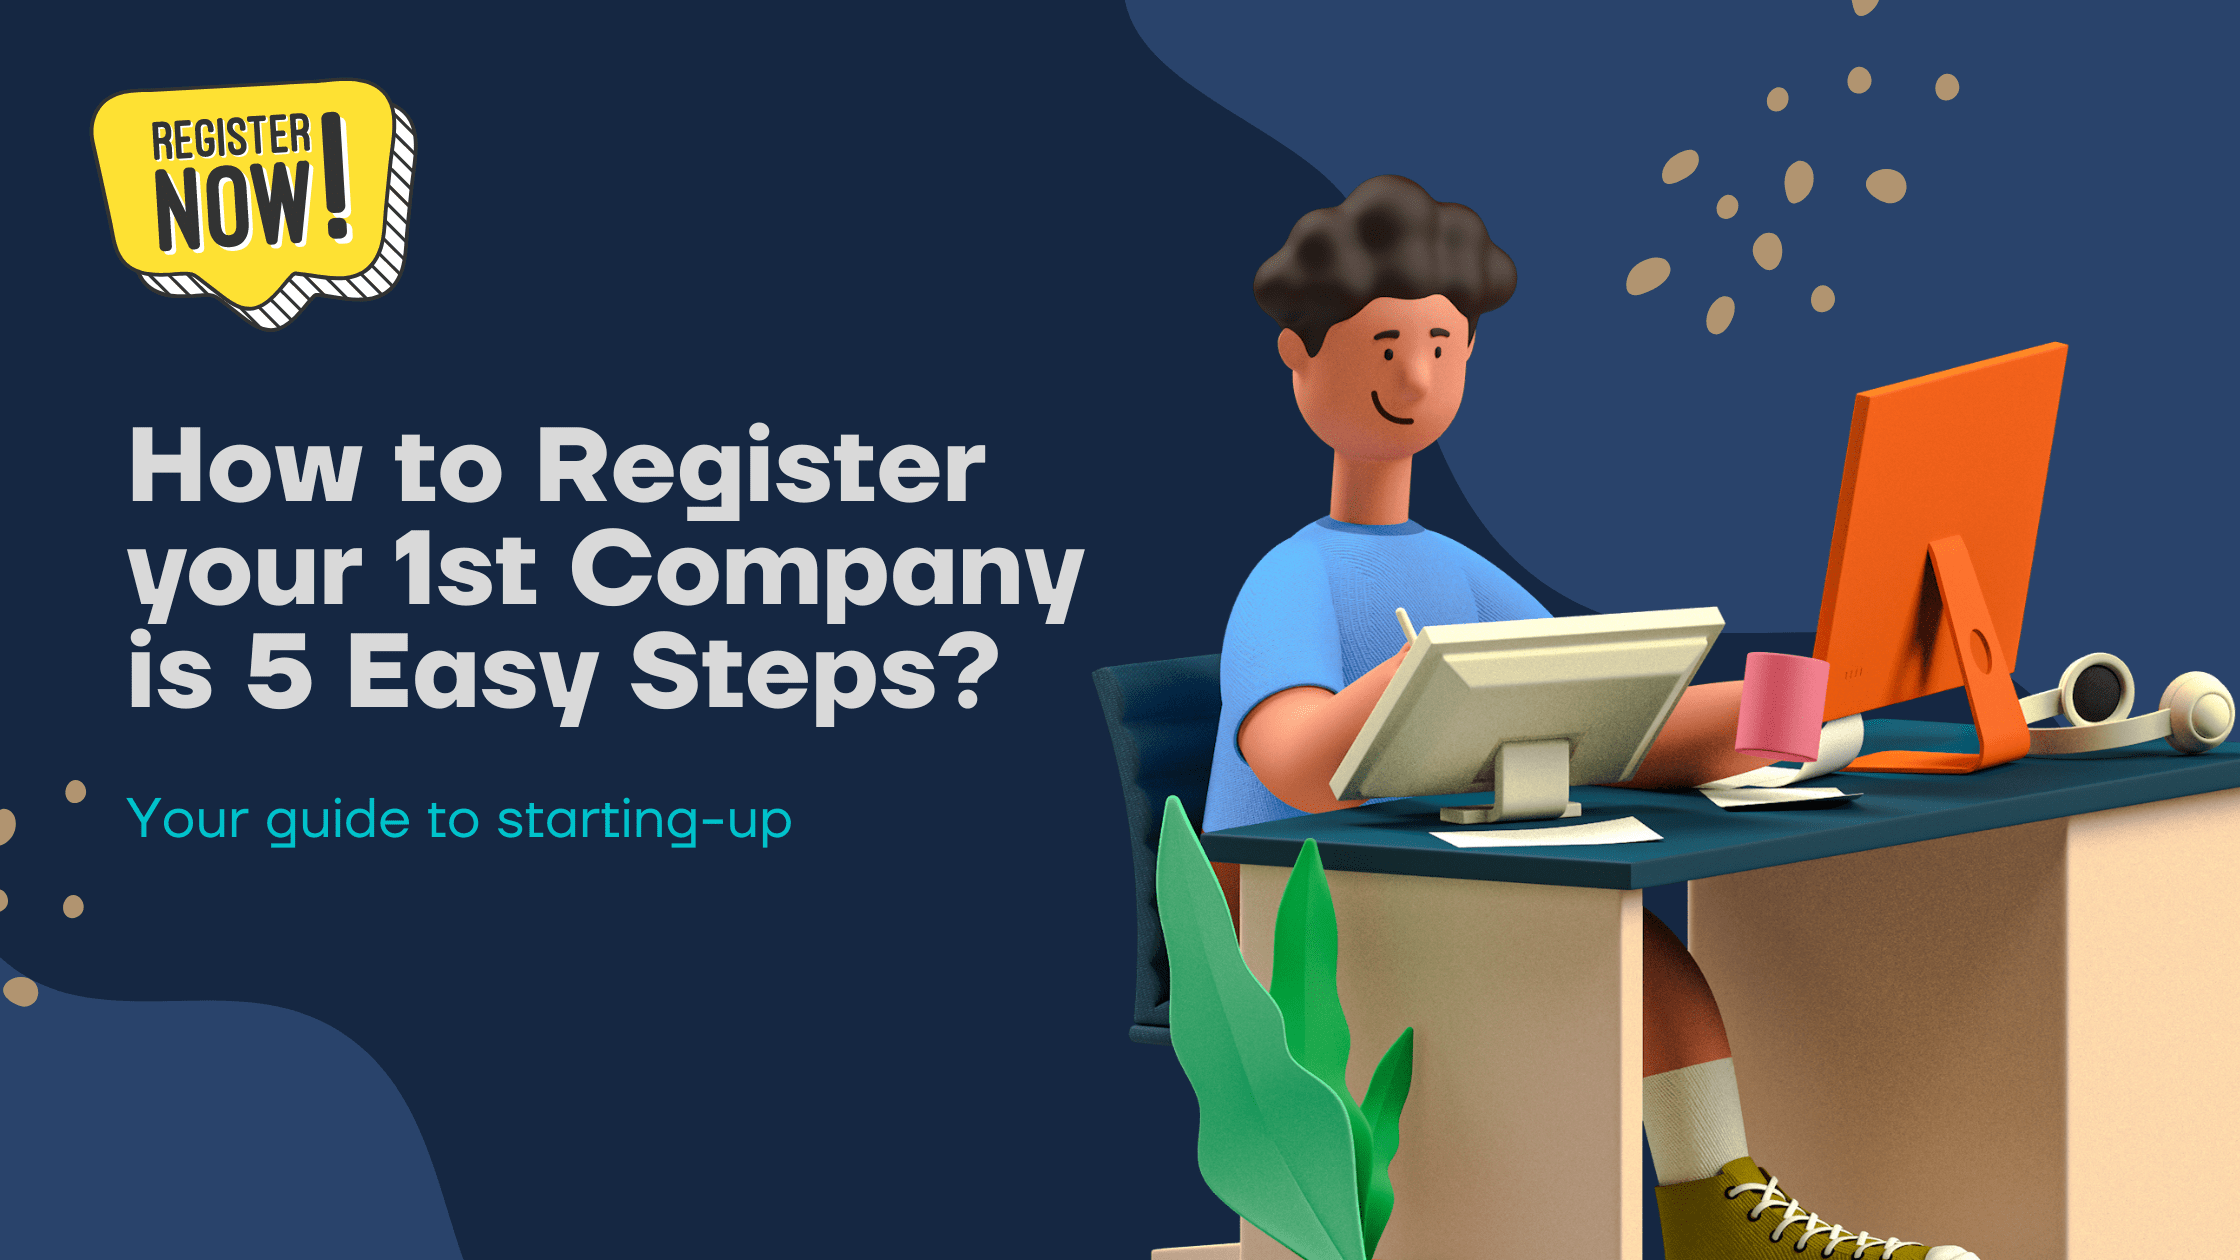 How to Register your 1st Company is 5 Easy Steps?